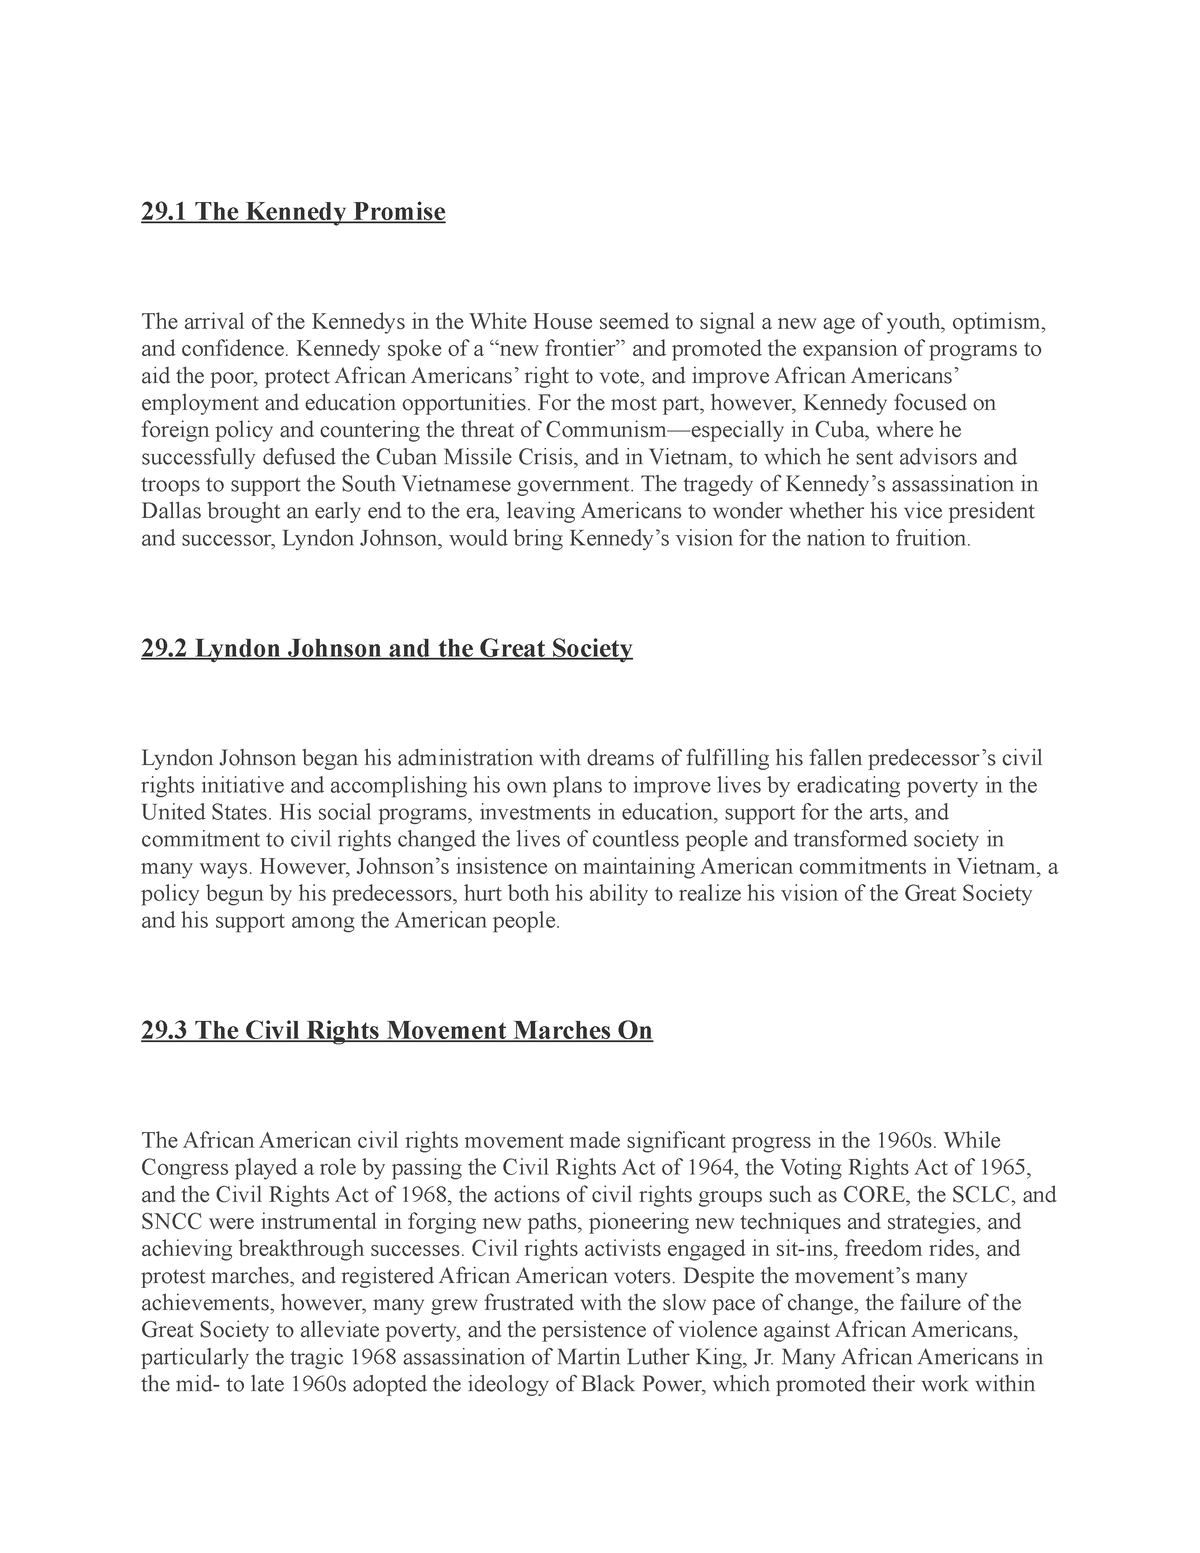 Us History Chapter 29 Summary 29 The Kennedy Promise The Arrival Of